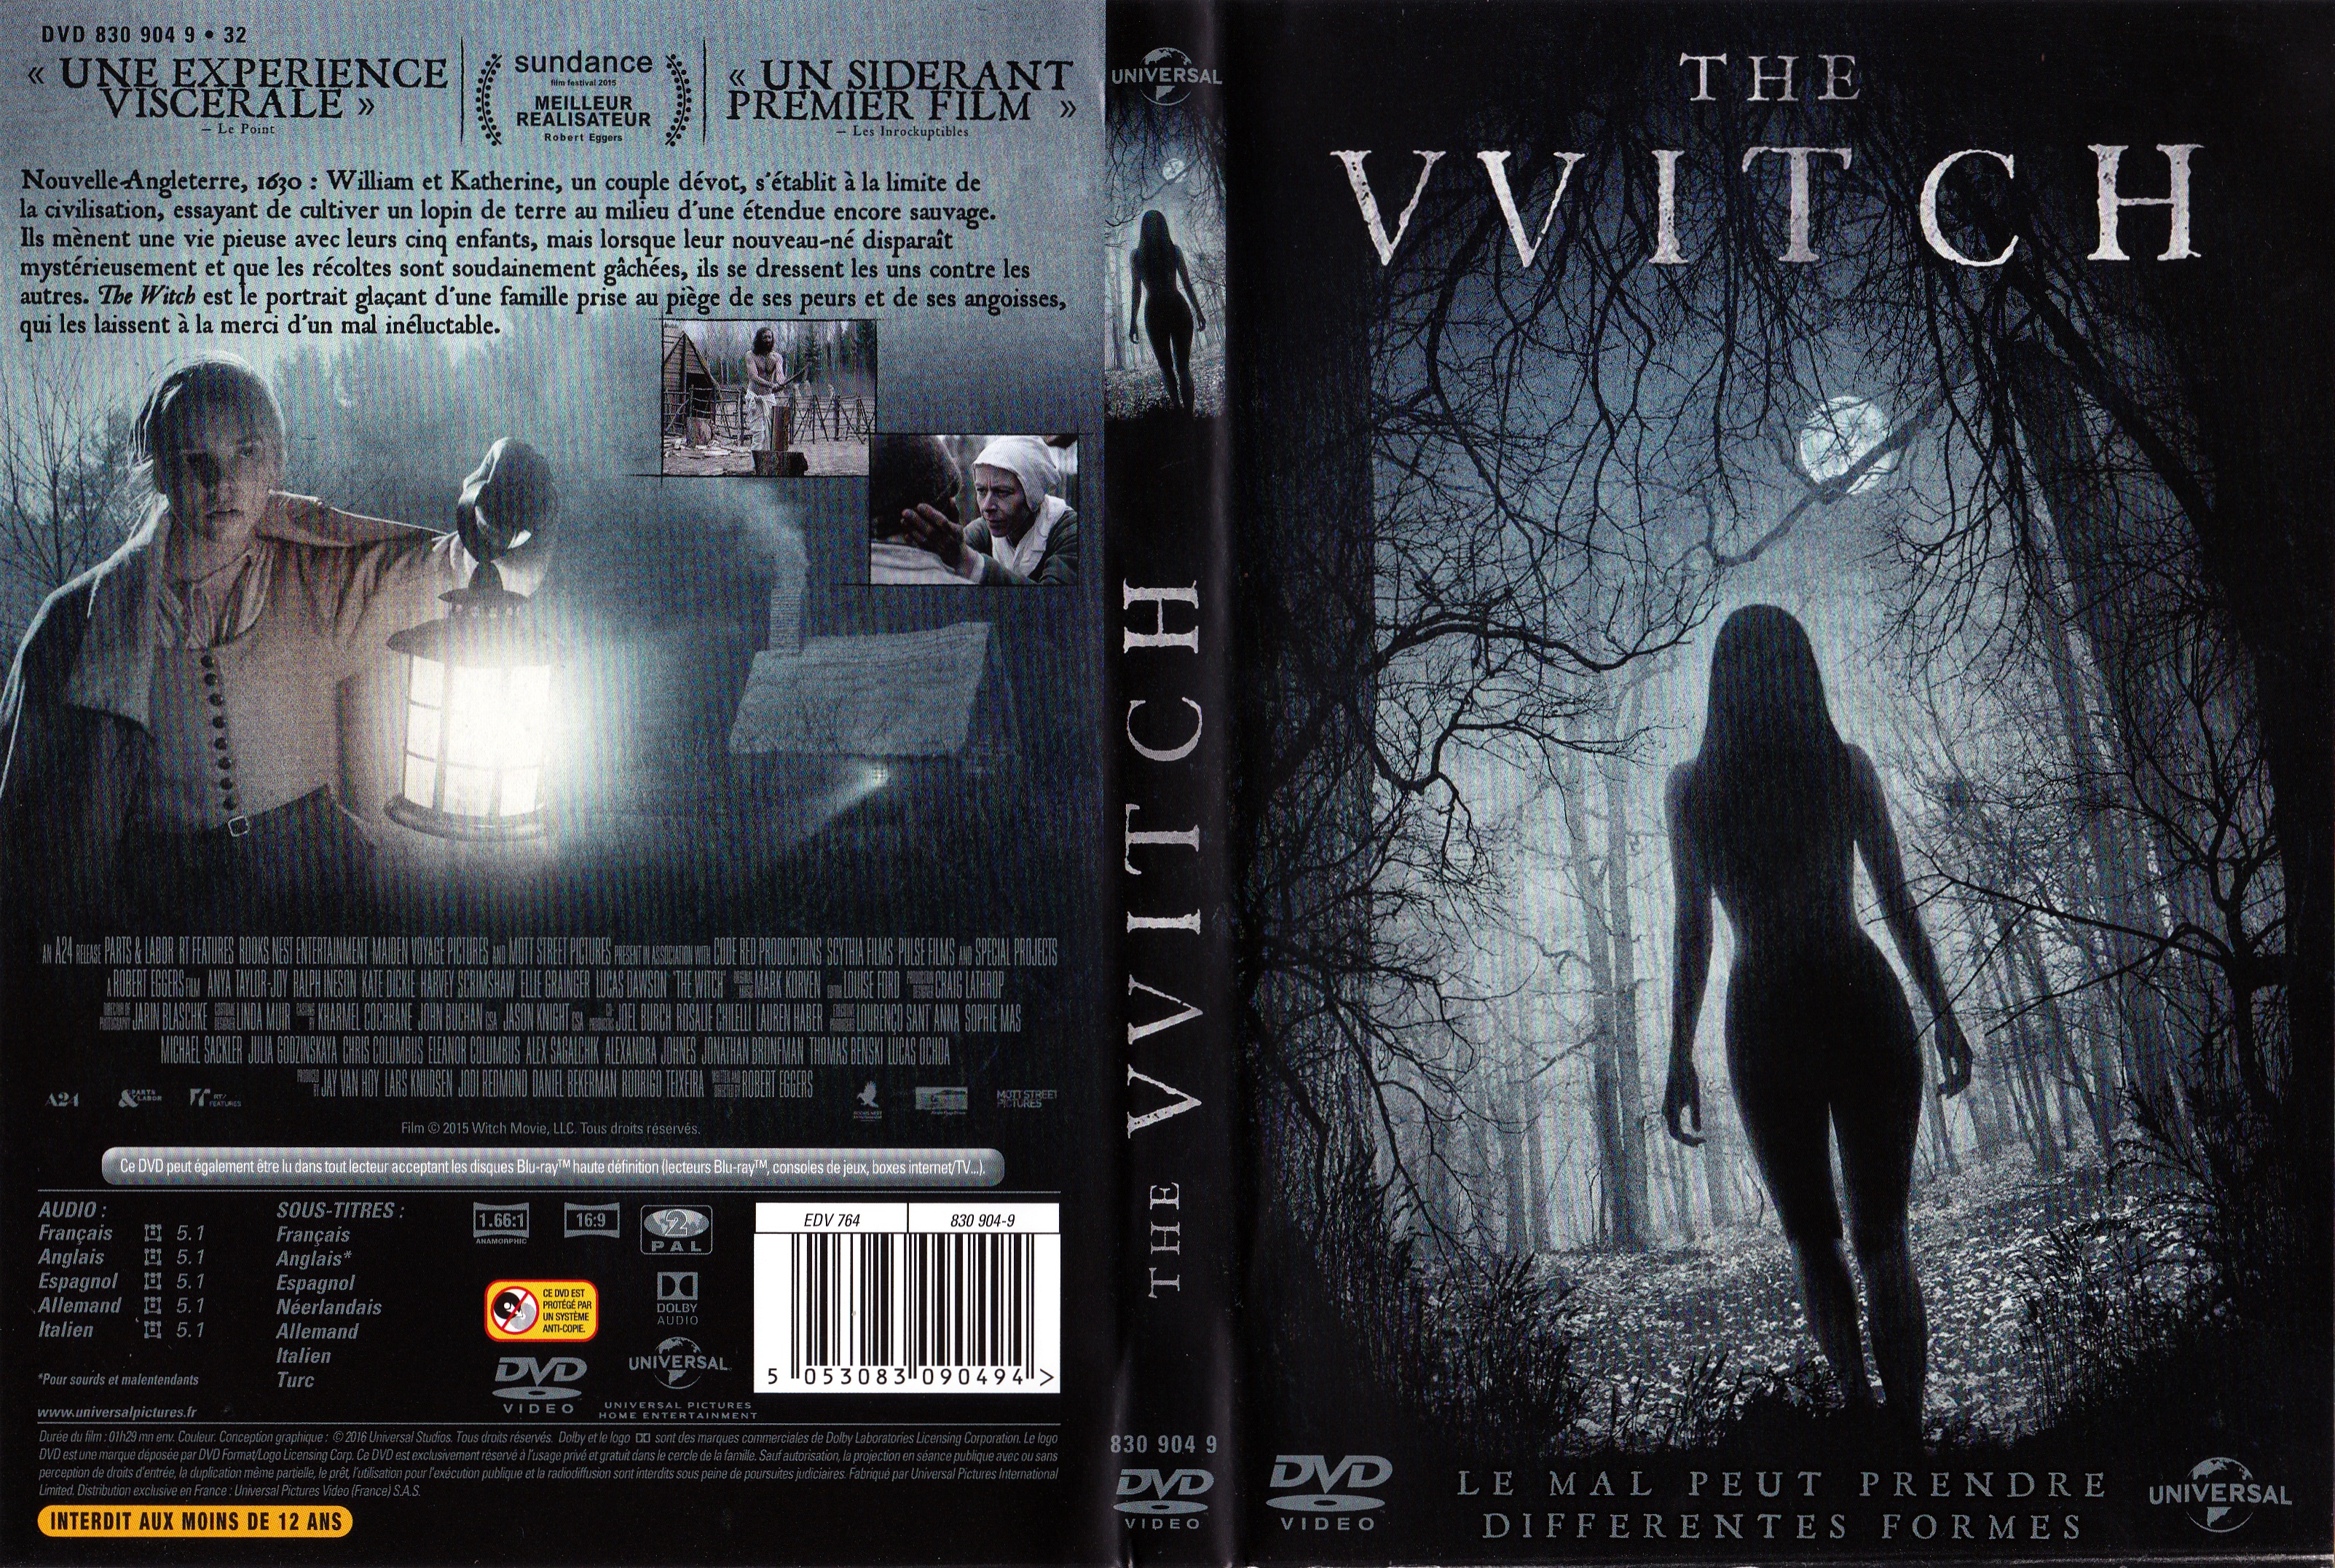 Jaquette DVD The vvitch